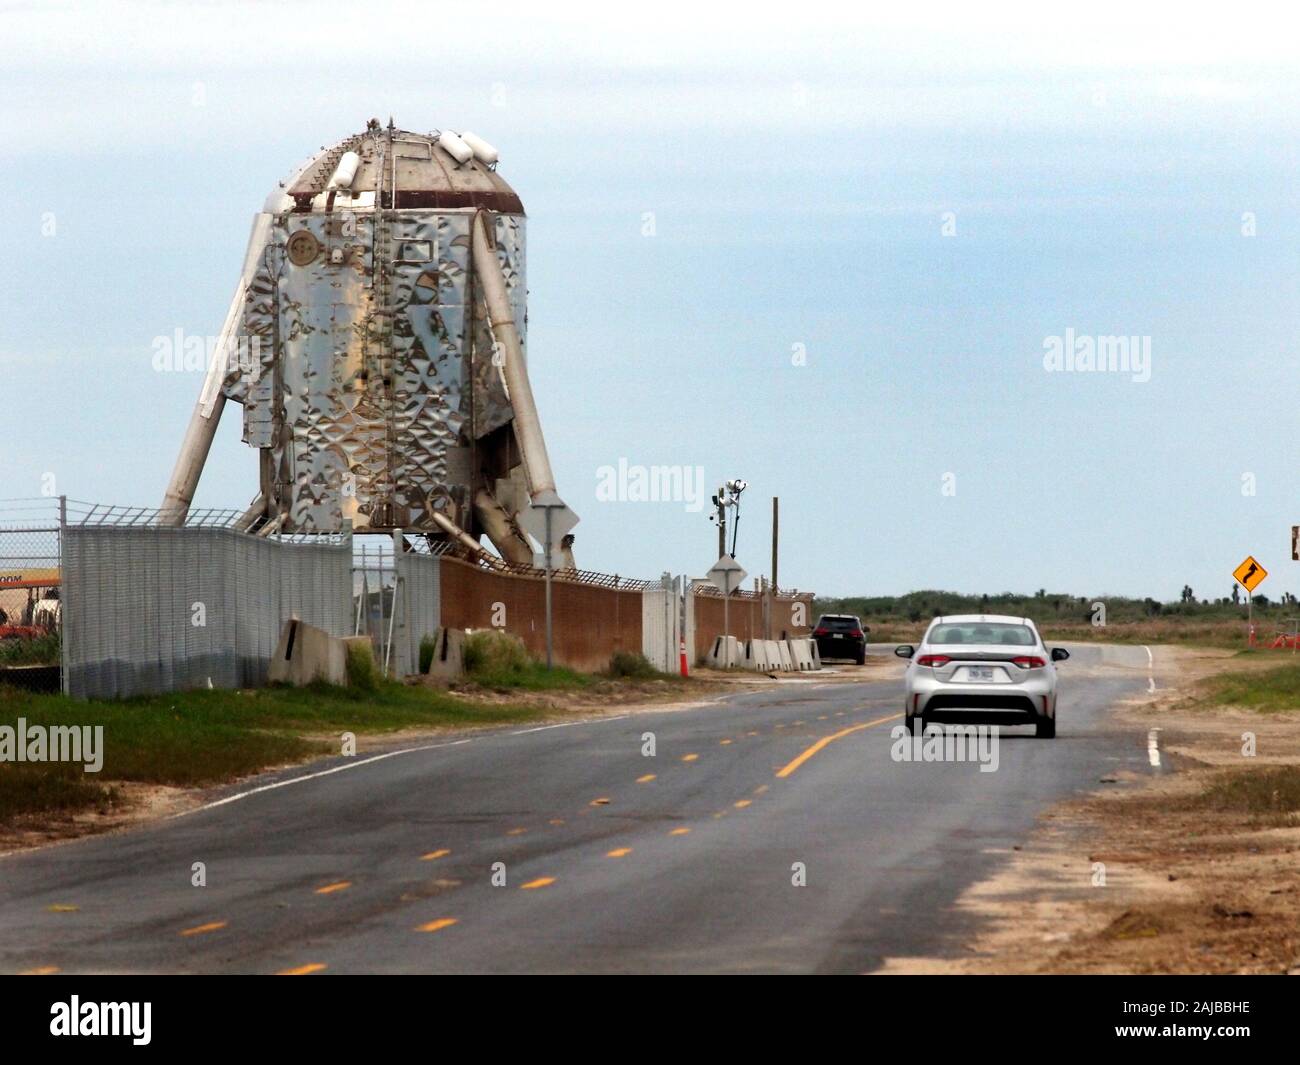 Brownsville, TX, USA-30 Dec 2019-Elon Musk's SpaceX  launch site, located at the very tip of SouthTexas salvages material off Starship Mk1 prototype which blew it's top during testing in November 2019. Stock Photo